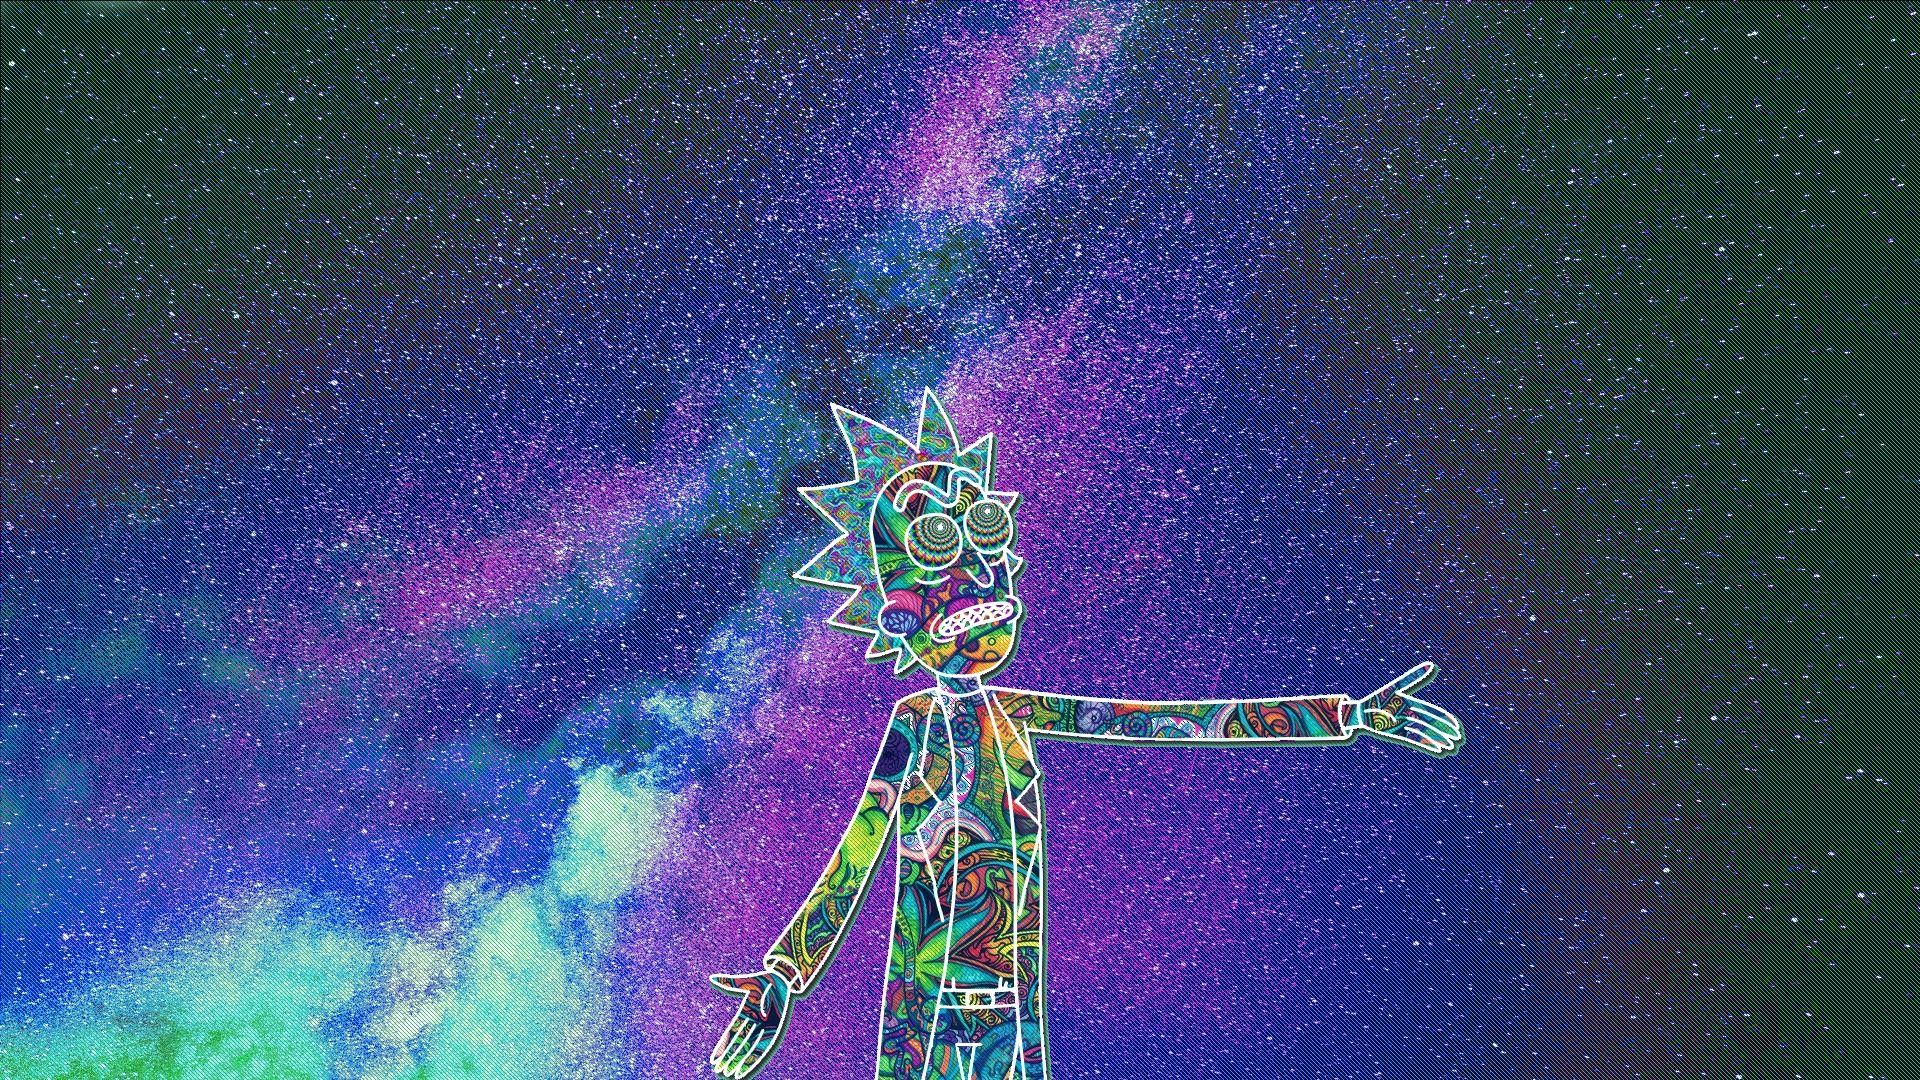 Beautiful Rick And Morty Wallpaper For HD 1080p